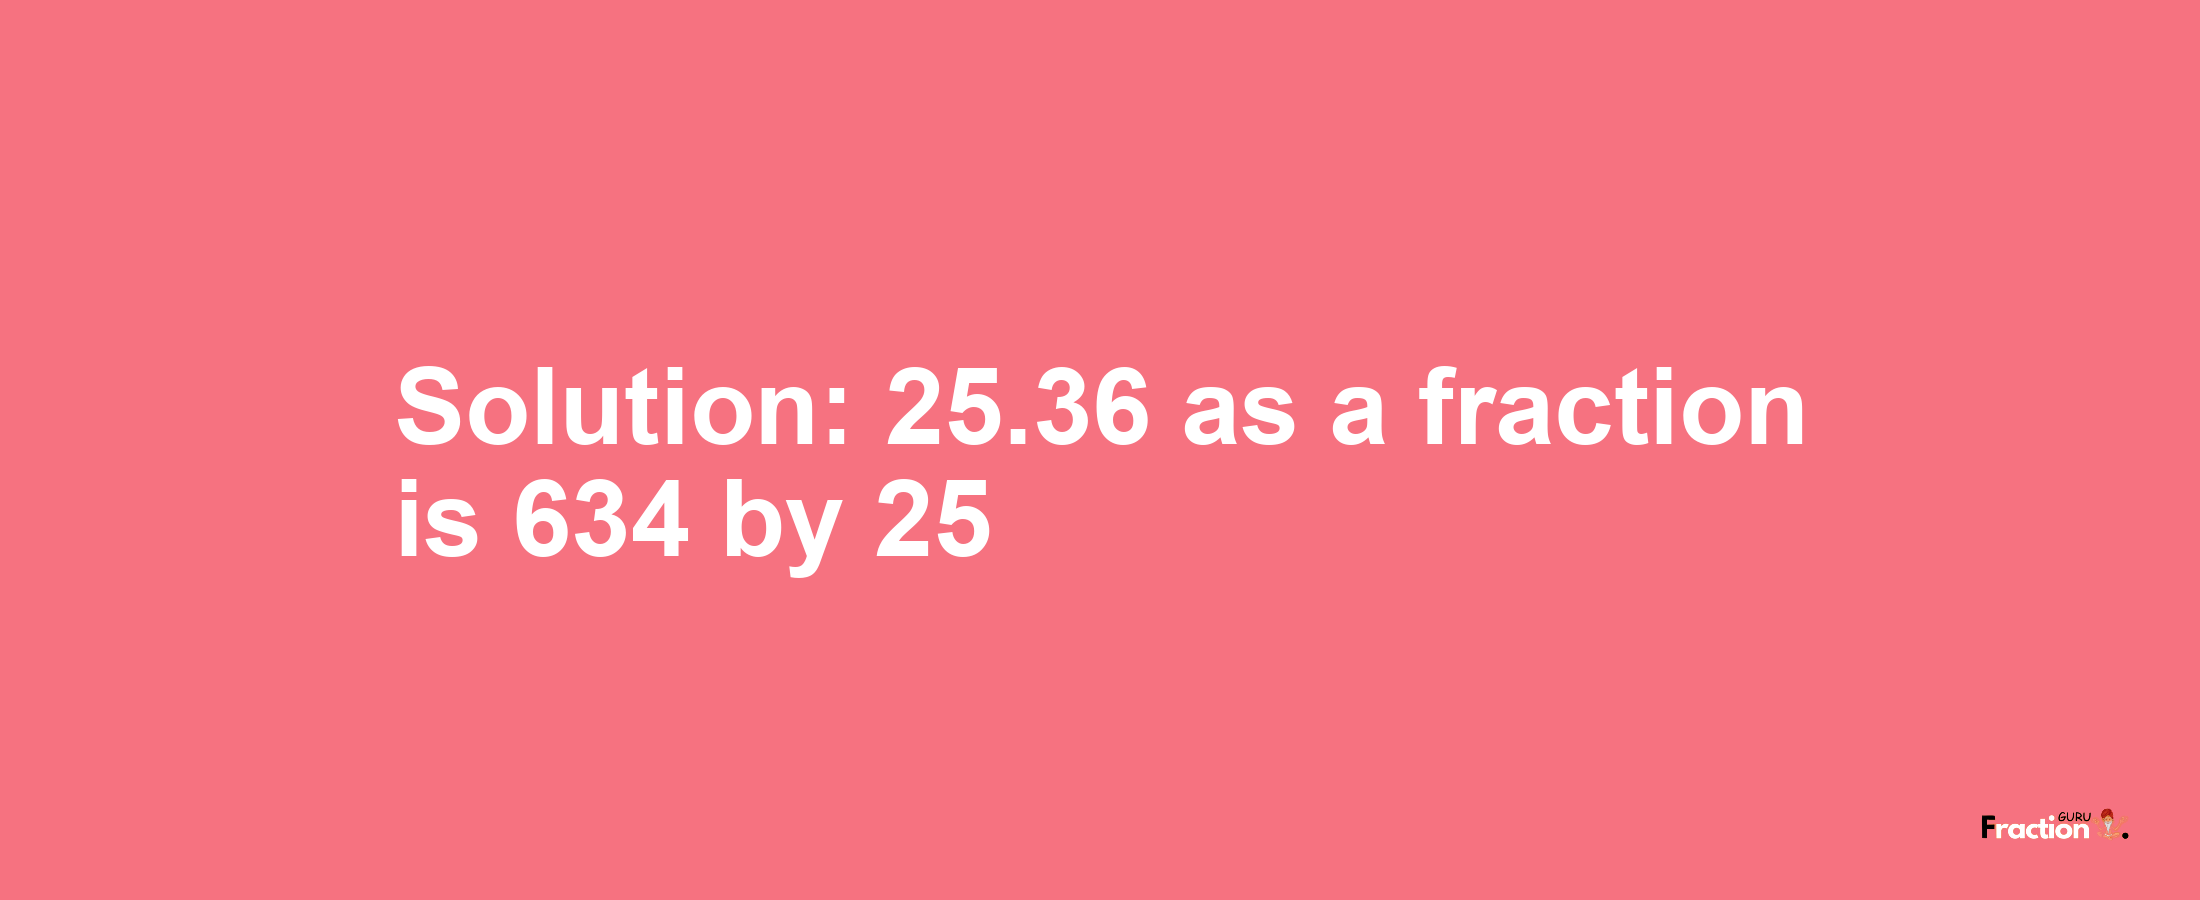 Solution:25.36 as a fraction is 634/25